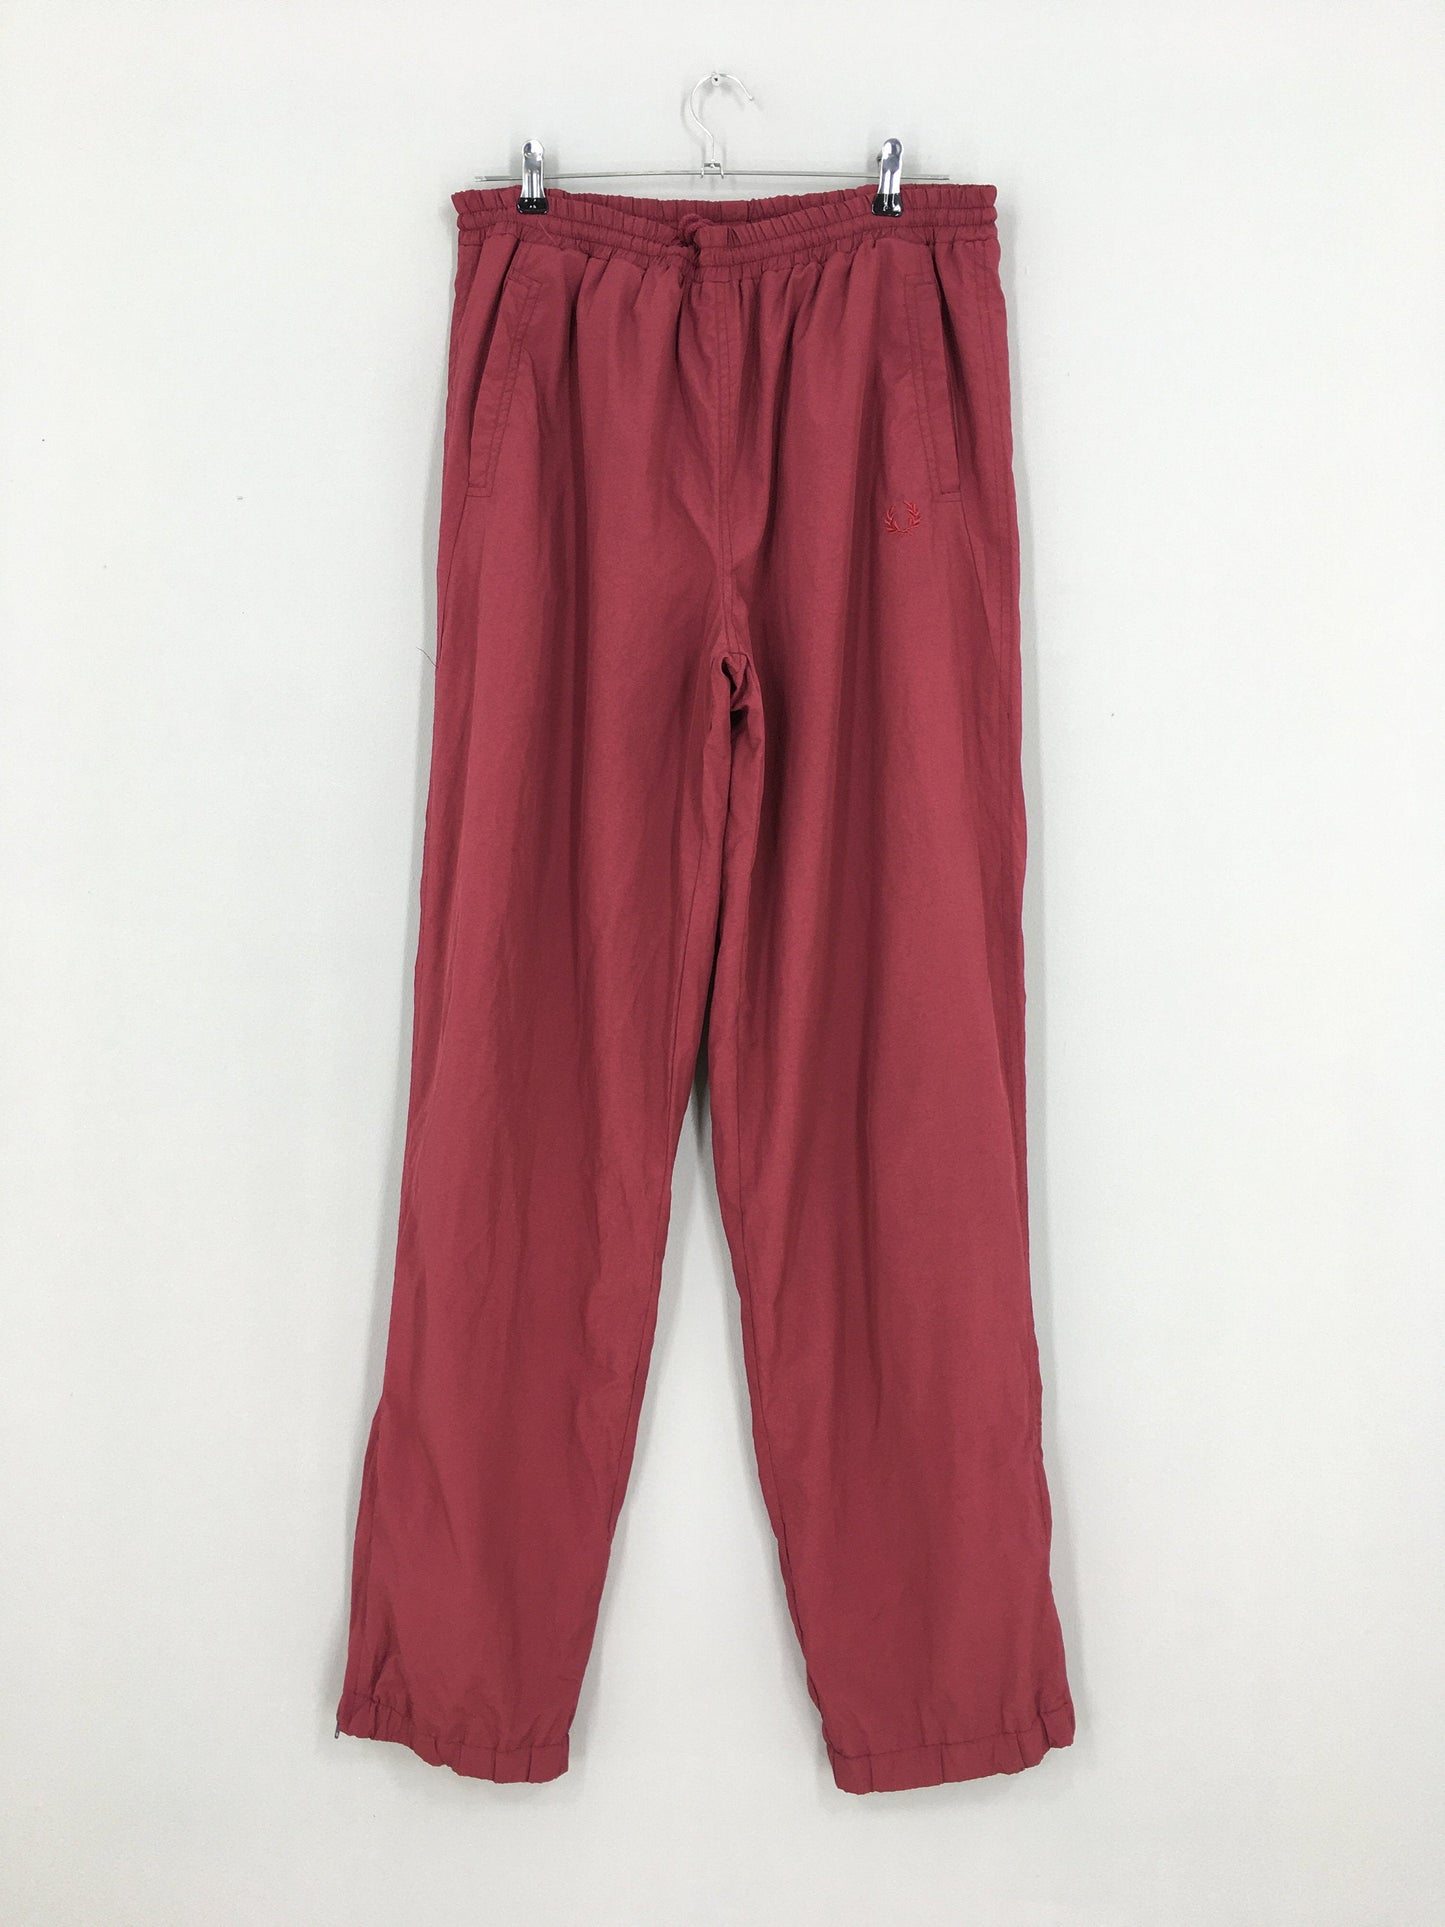 Fred Perry Red Track Pants Size 32-36